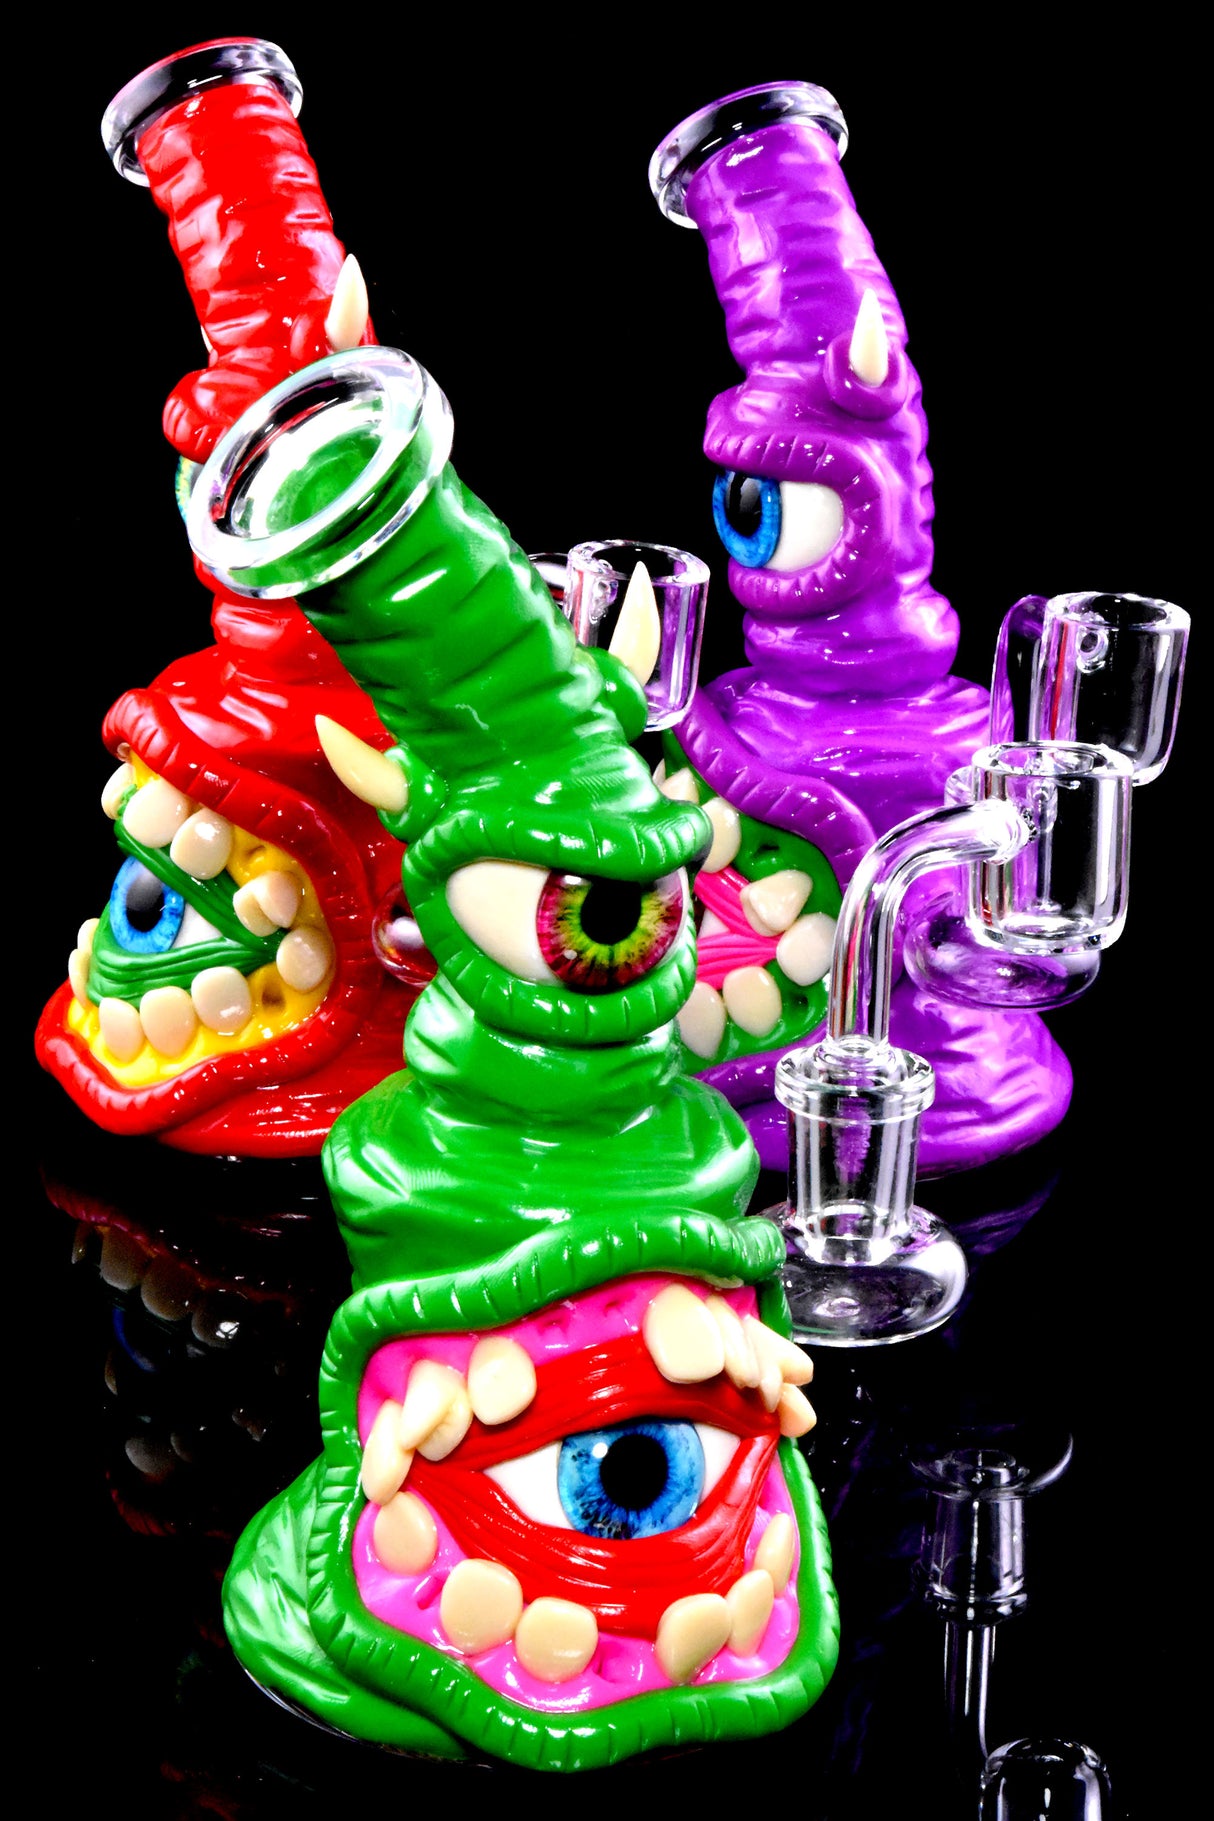 6.5" Small GoG Colorful Cyclops Resin Monster Dab Rig with Showerhead Perc - WP3051